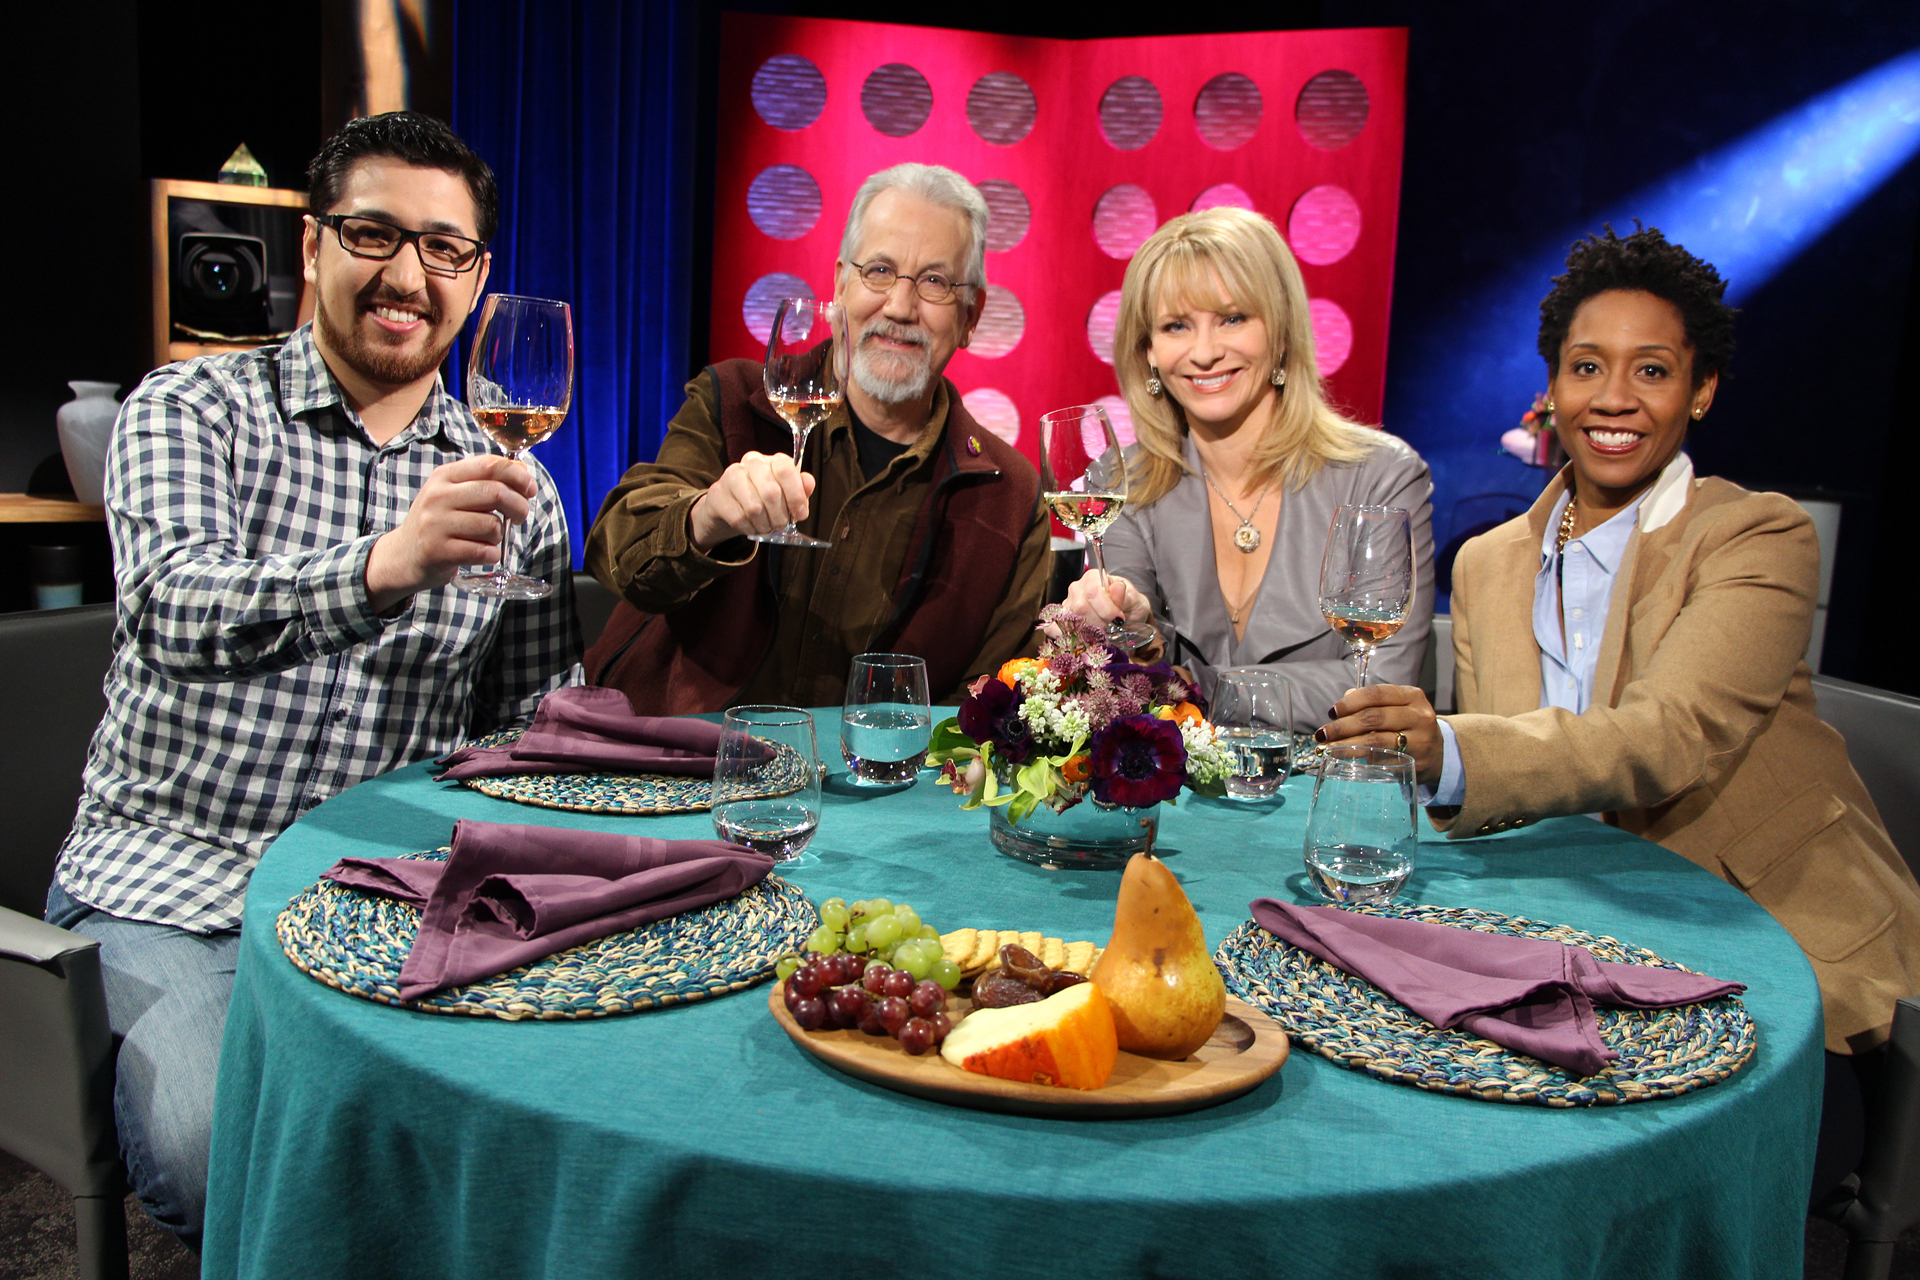  Check, Please! Bay Area host Leslie Sbrocco and guests on set for the second episode of Season 10. Photo: Wendy Goodfriend